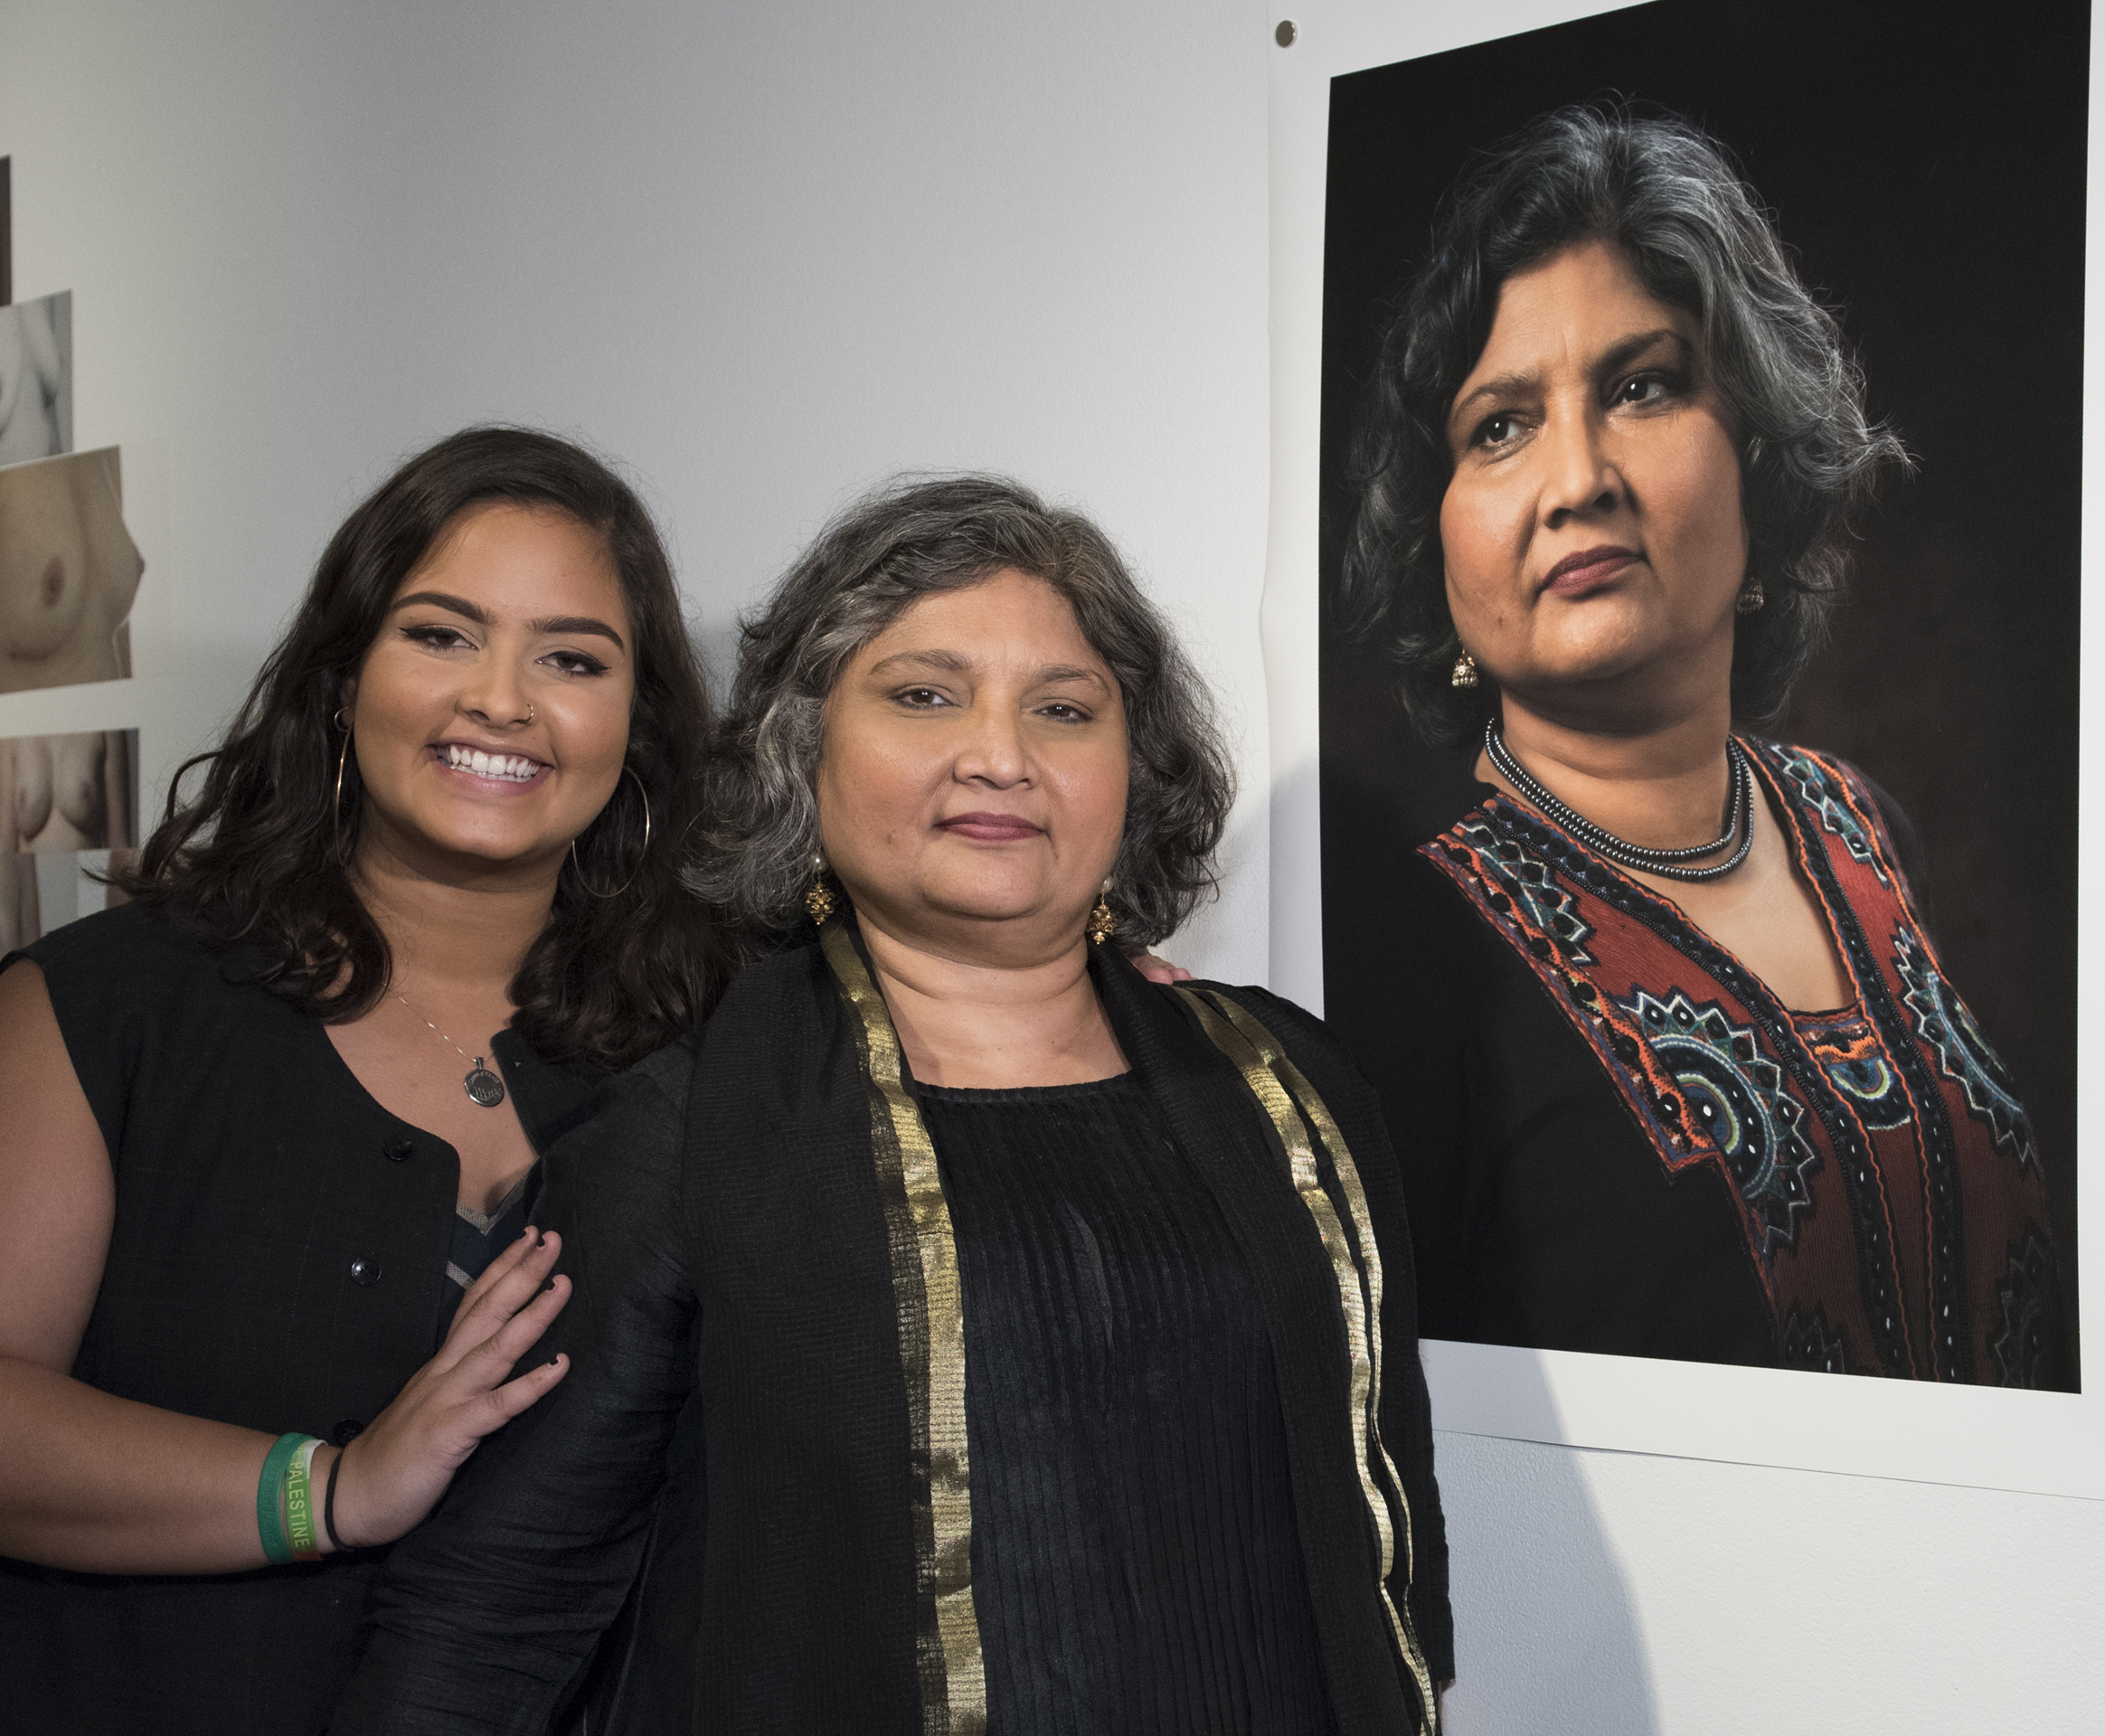 Tula Goenka, center, with her daughter, Ranya Shannon, who was 9 when Goenka was diagnosed with breast cancer, standing next to Cindy Bell‘s portrait of Goenka at the Look Now exhibition. (This and the following photos taken at the opening of the exhibit are by Susan Kahn, the Look Now exhibition portraits shown are by Cindy Bell)